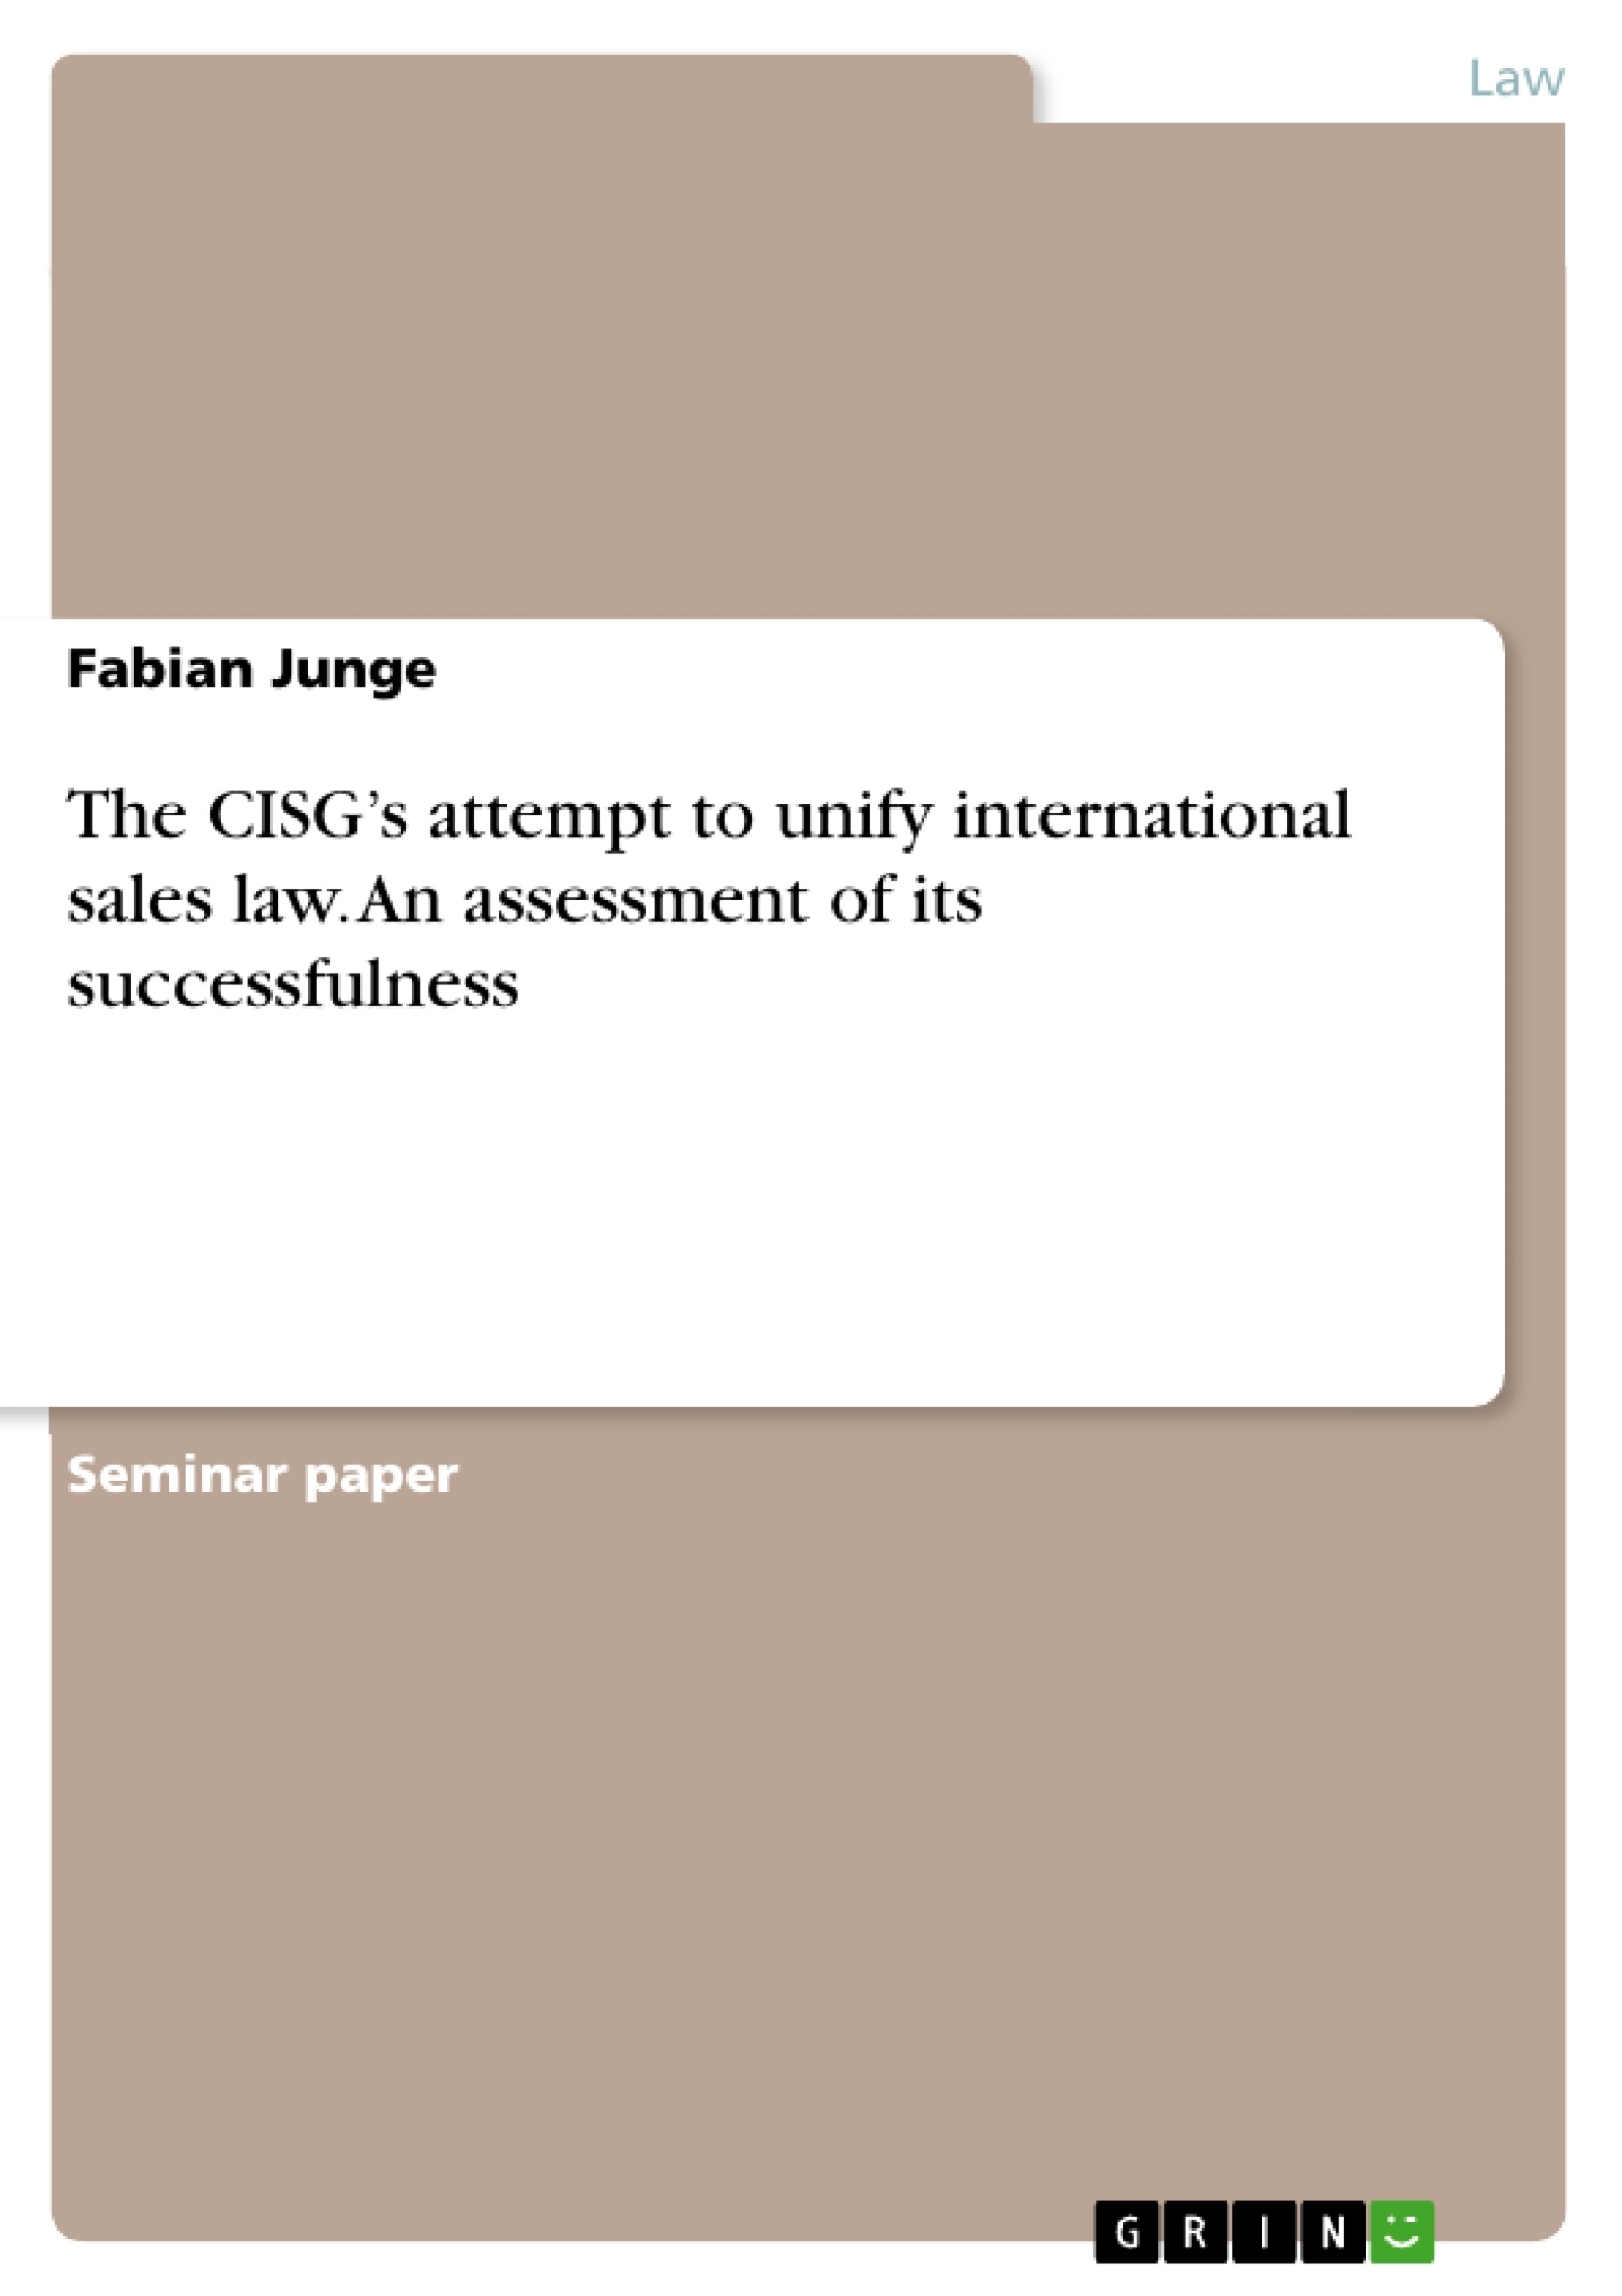 Titel: The CISG’s attempt to unify international sales law. An assessment of its successfulness